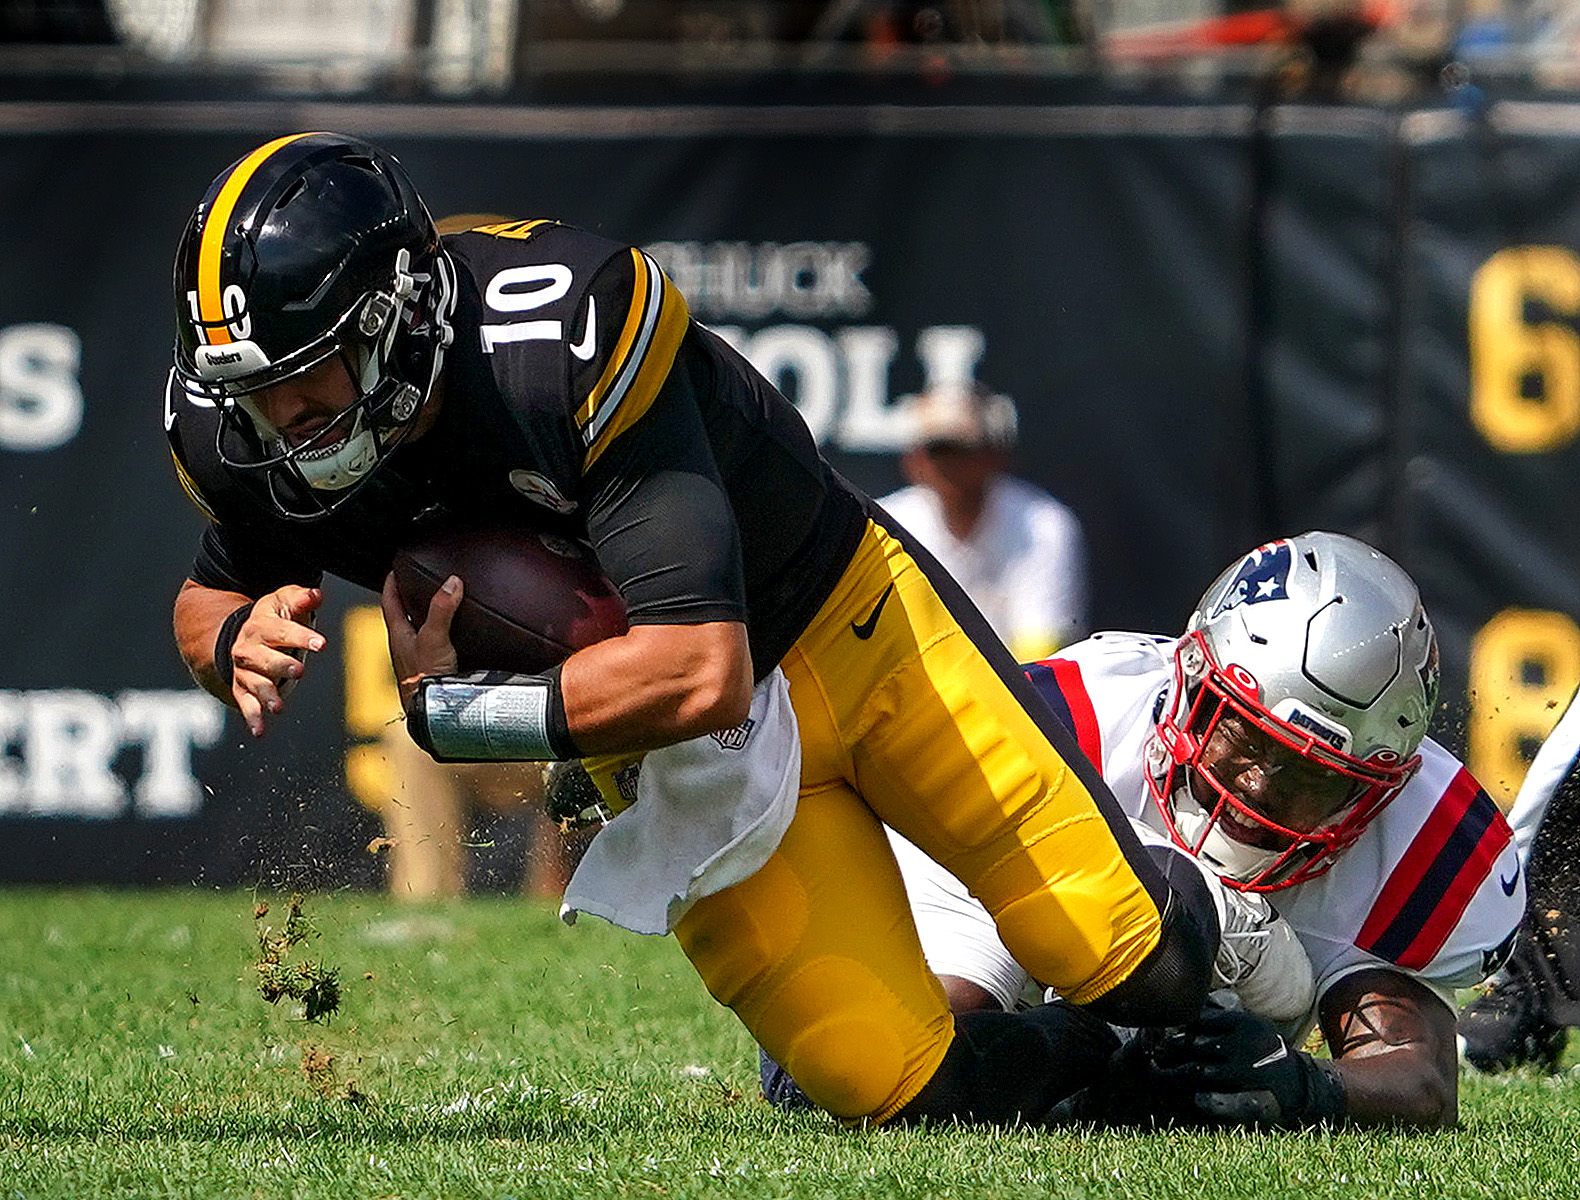 New England Patriots (17 Vs. Pittsburgh Steelers (14) At Heinz Field